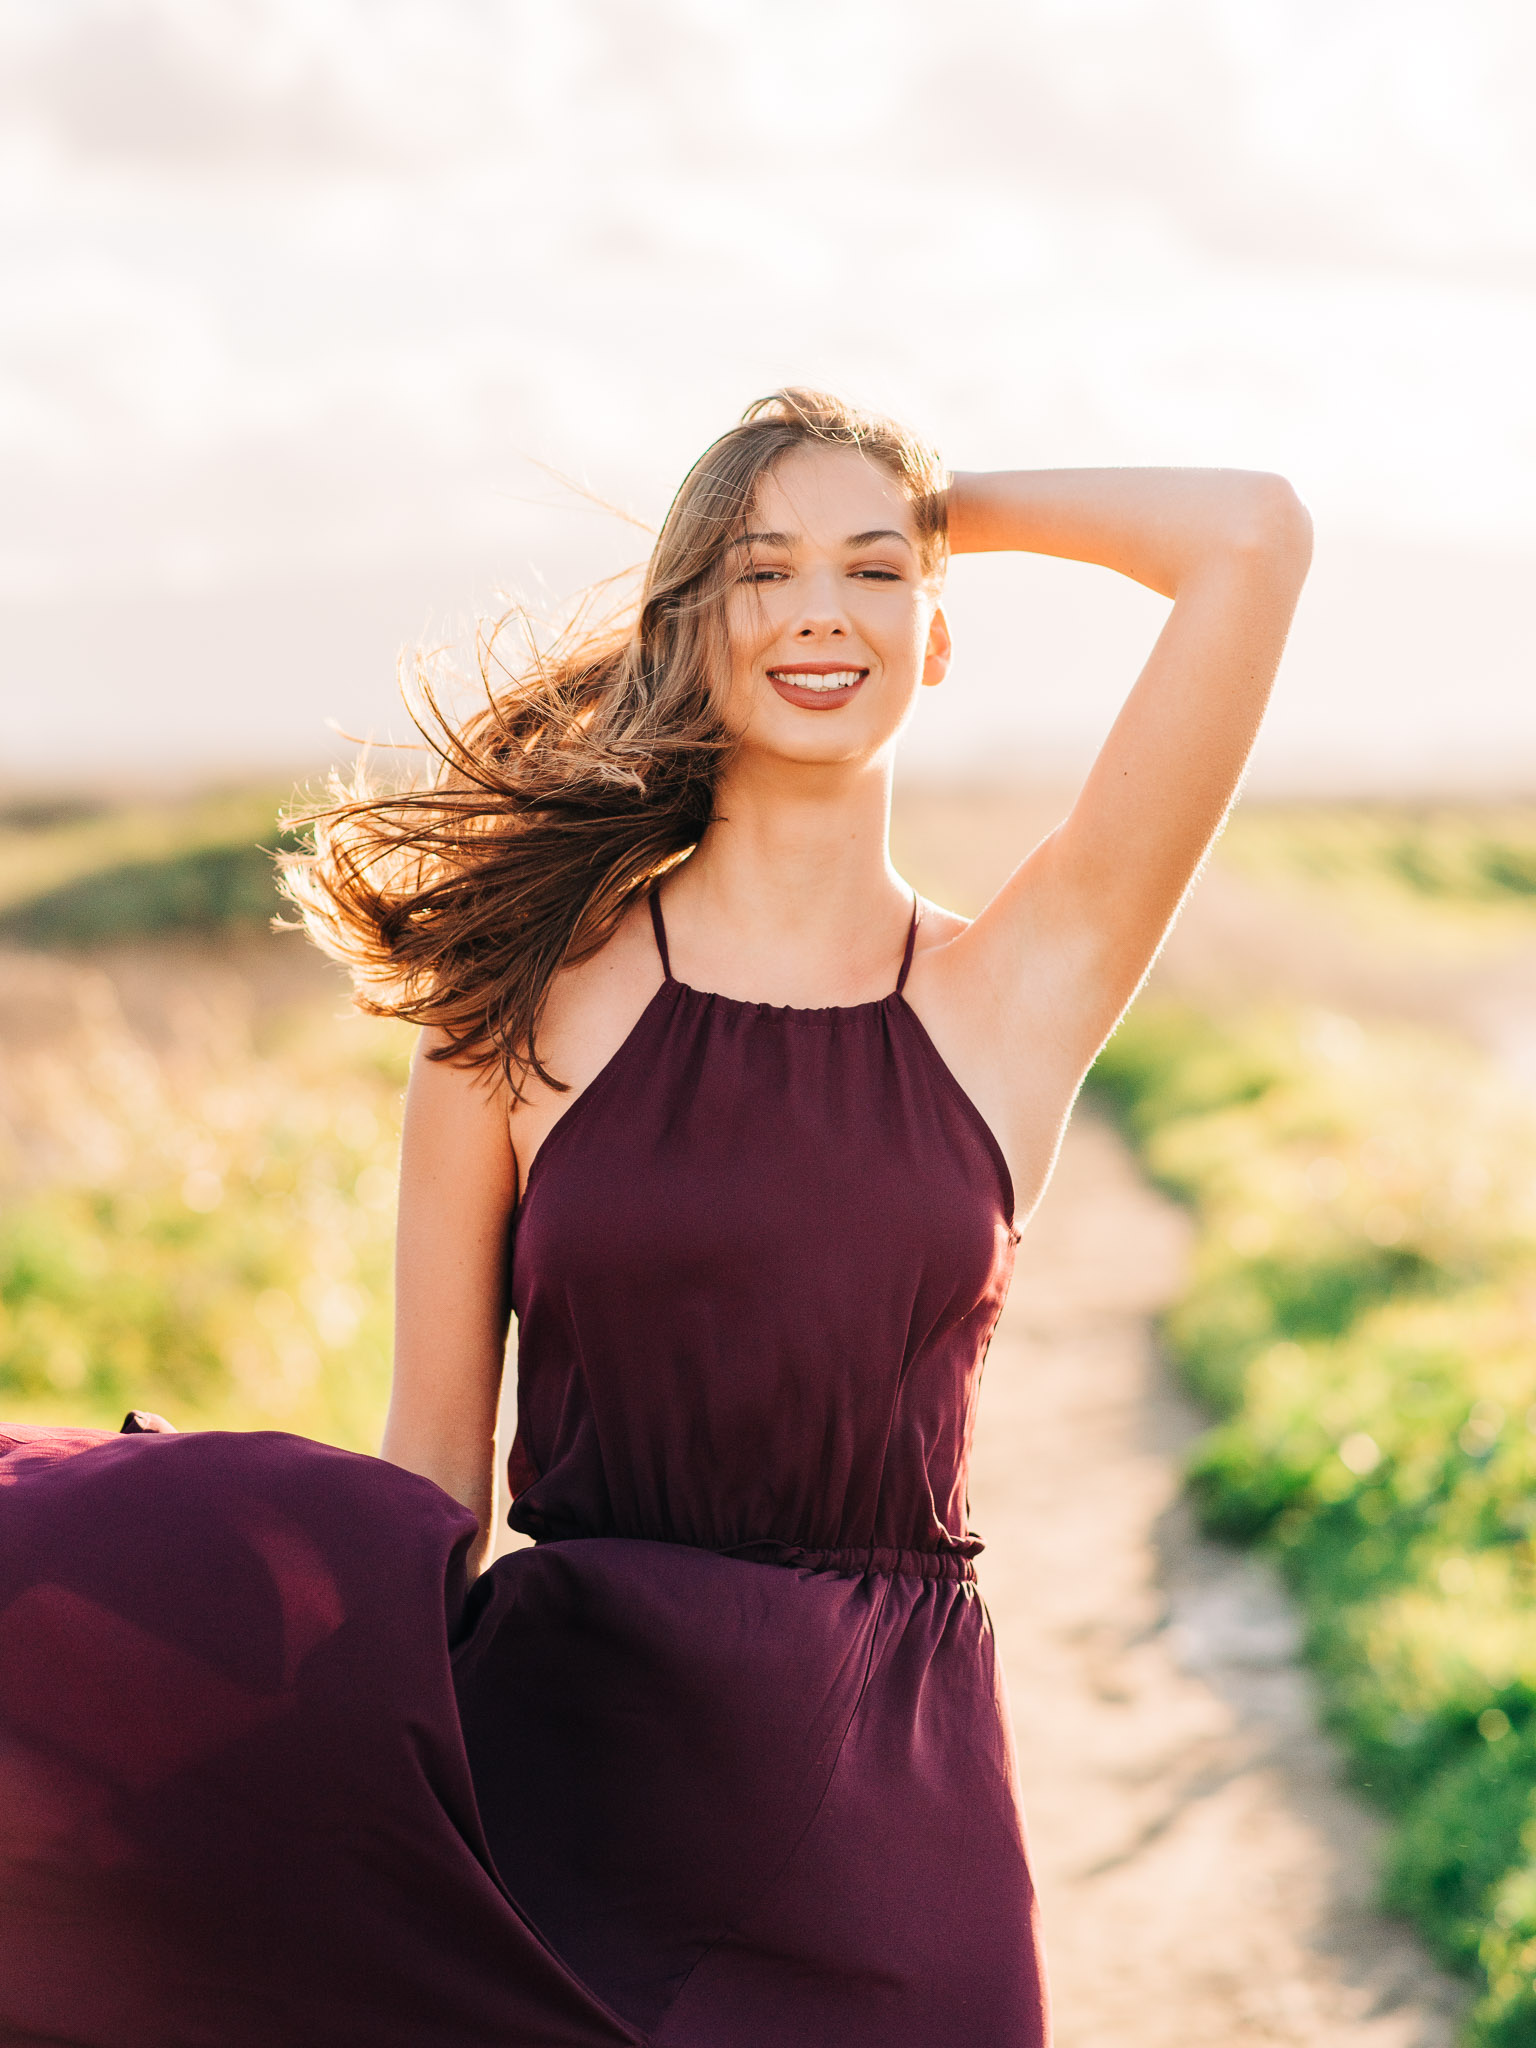 Teen with long dress and hair blowing in the wind, by Emily Kim Photography.